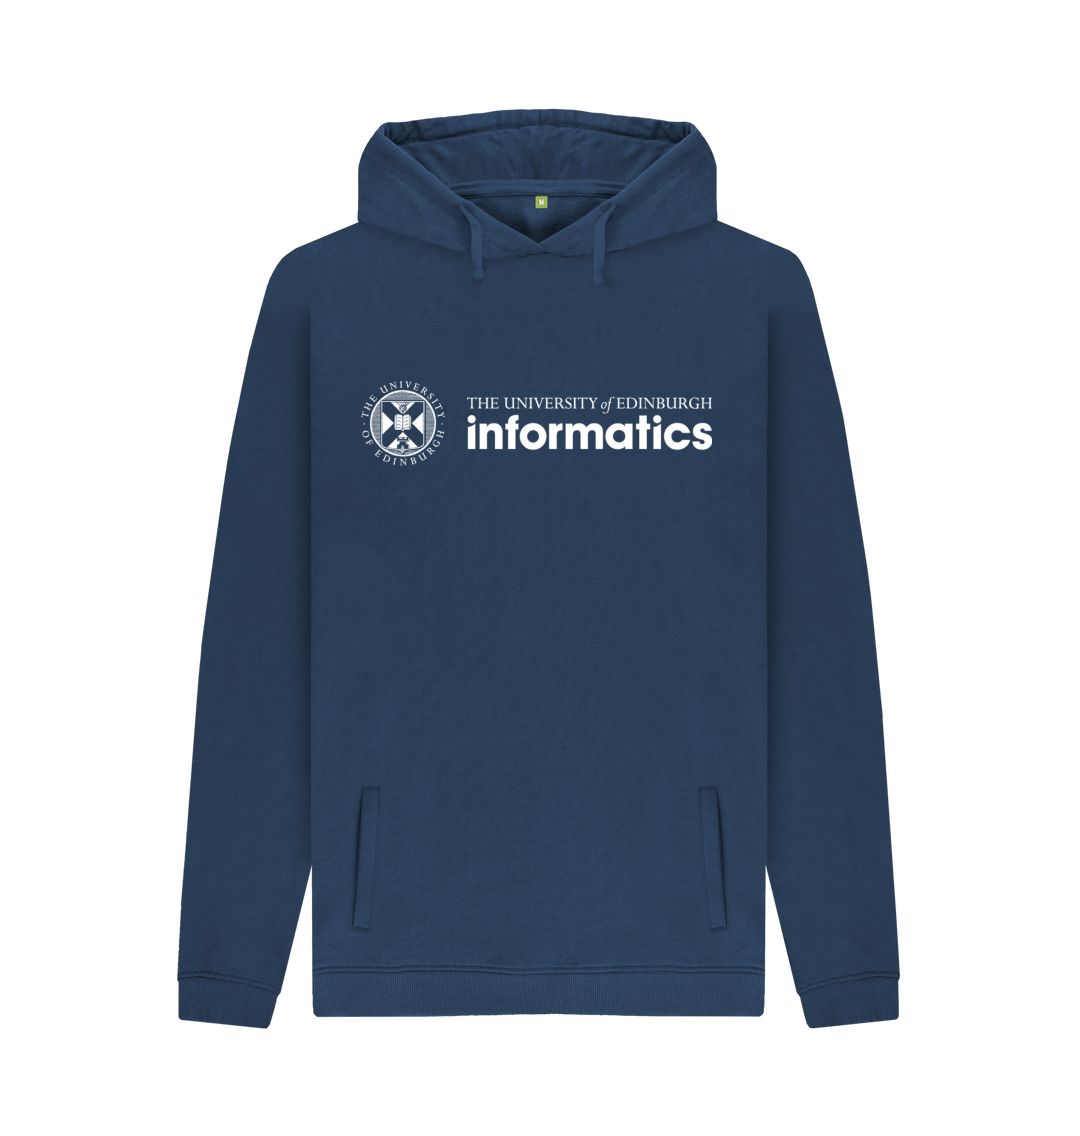 Navy hoodie with white University crest and text that reads ' University of Edinburgh: Informatics'